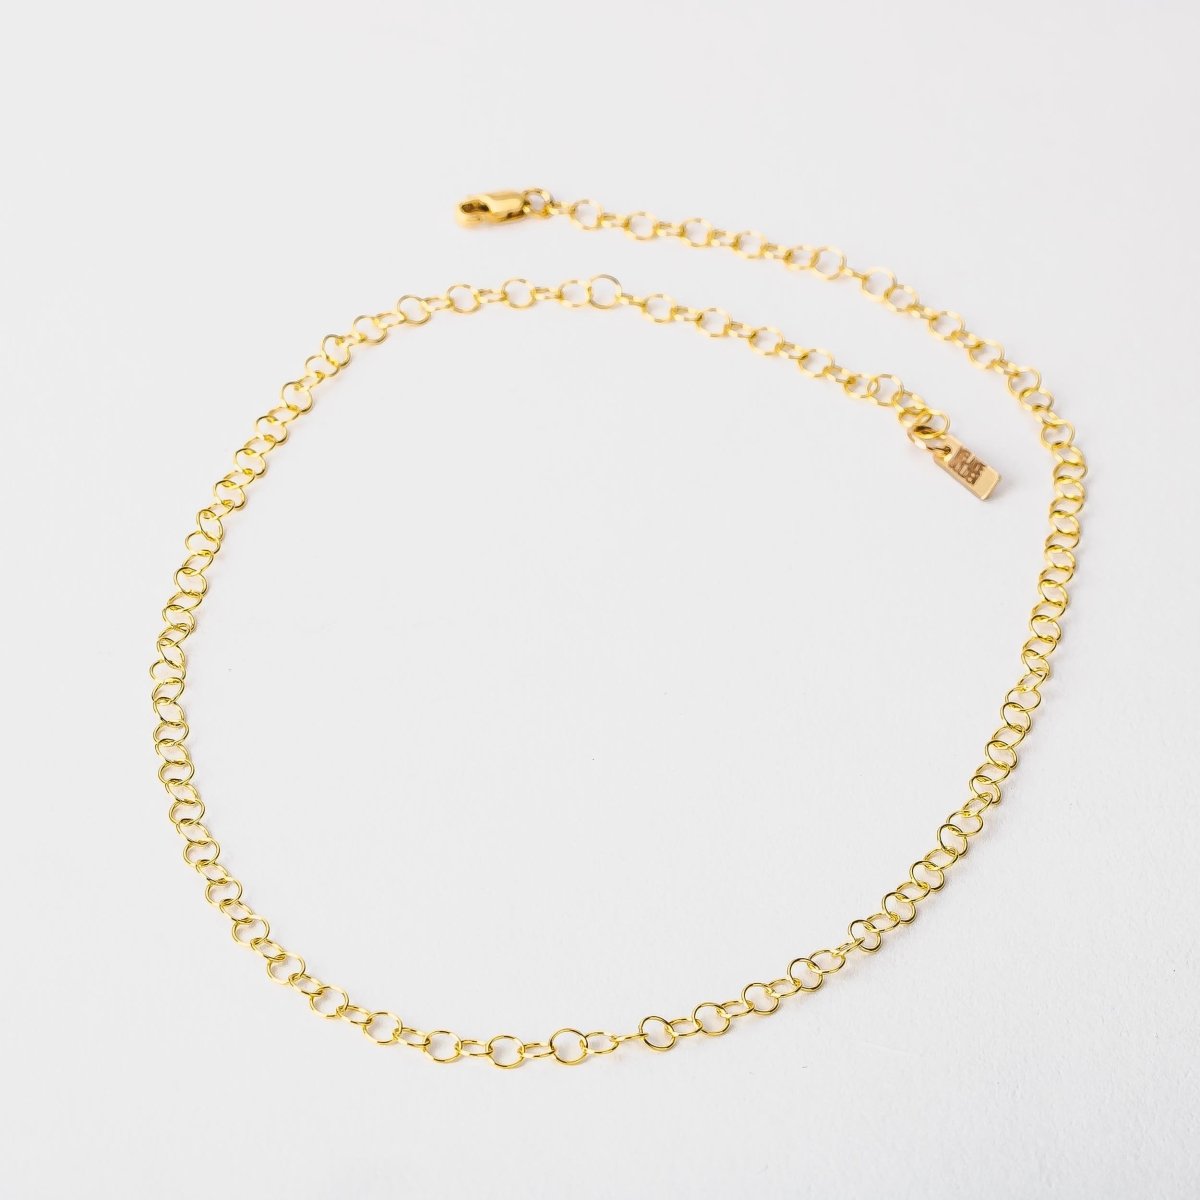 Celine Chain Necklace - Melanie Golden Jewelry - _badge_new, essential chains, everyday essentials, necklaces, new